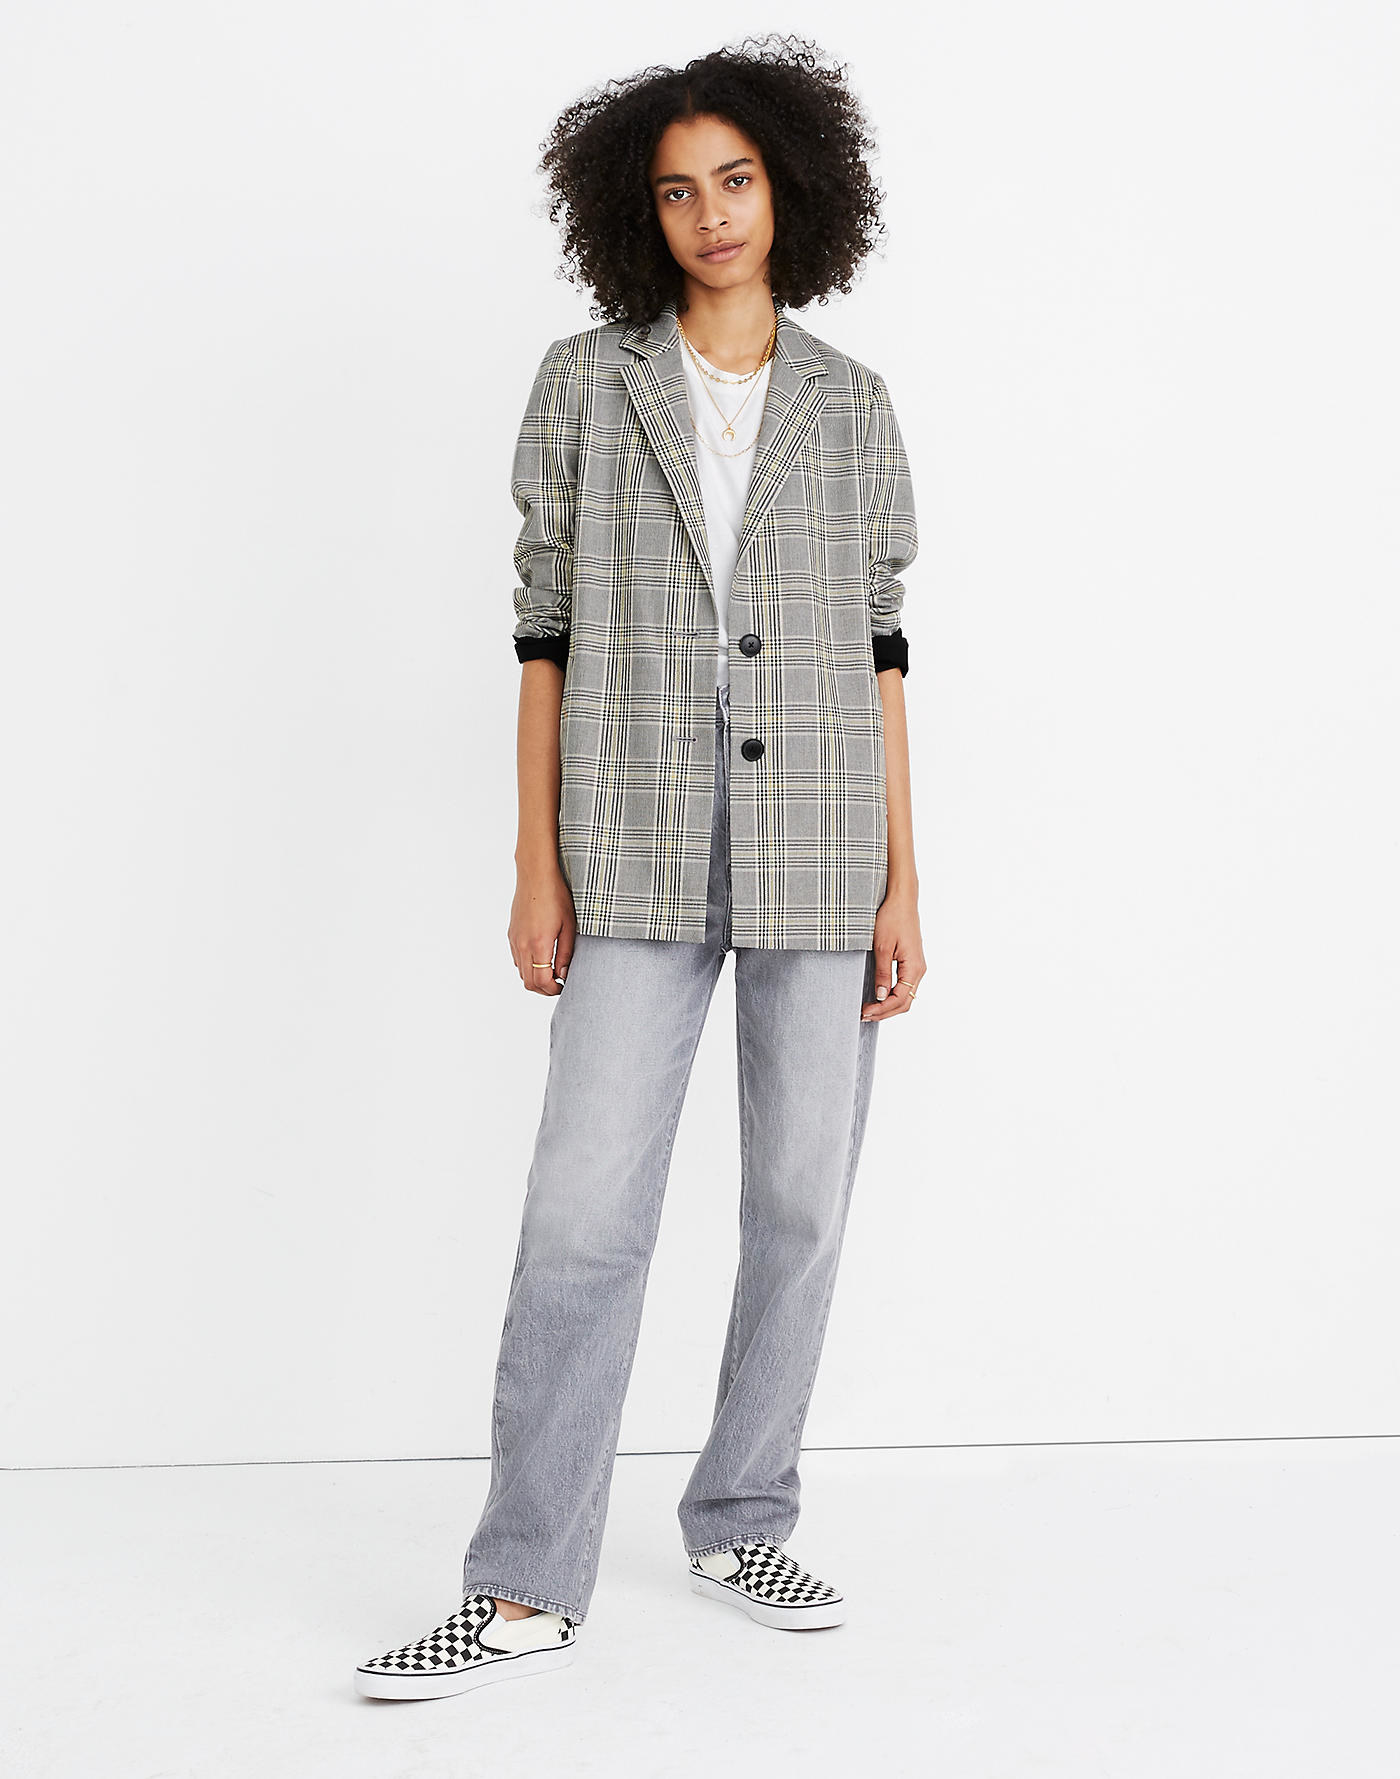 A model in a light gray plaid collared oversized jacket rolled up at the sleeves 